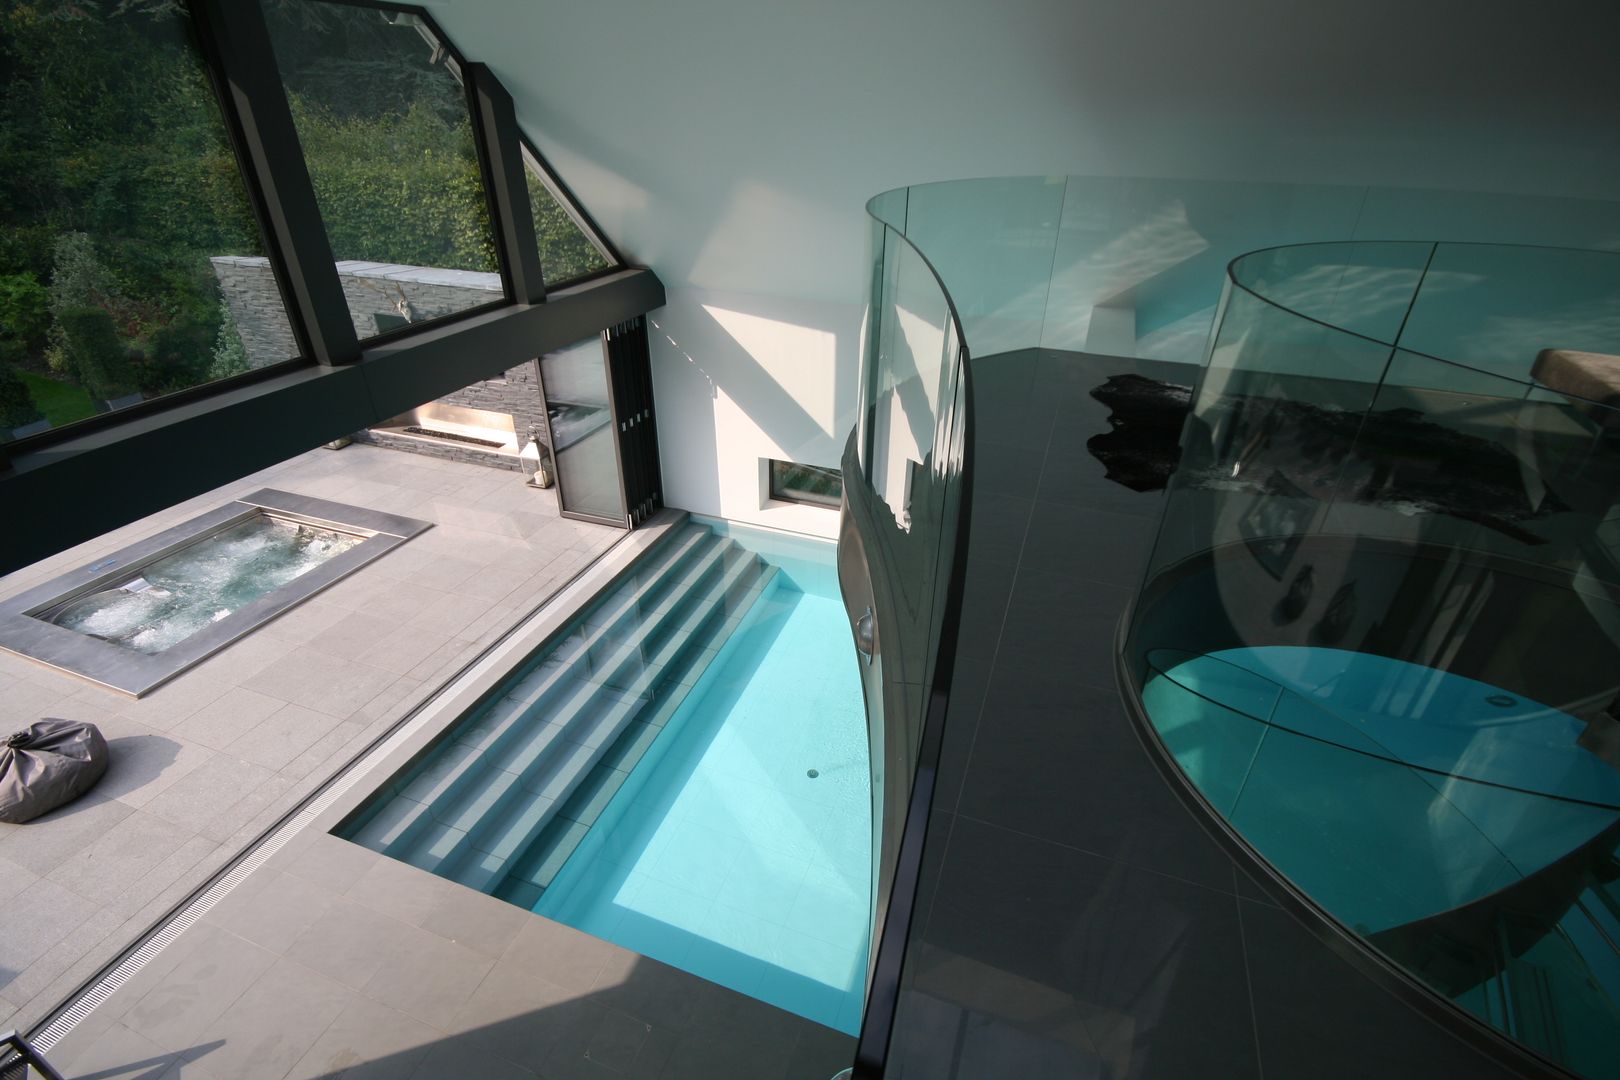 Indoor pool with waterfall features, sauna and stainless steel spa, Tanby Pools Tanby Pools Albercas modernas